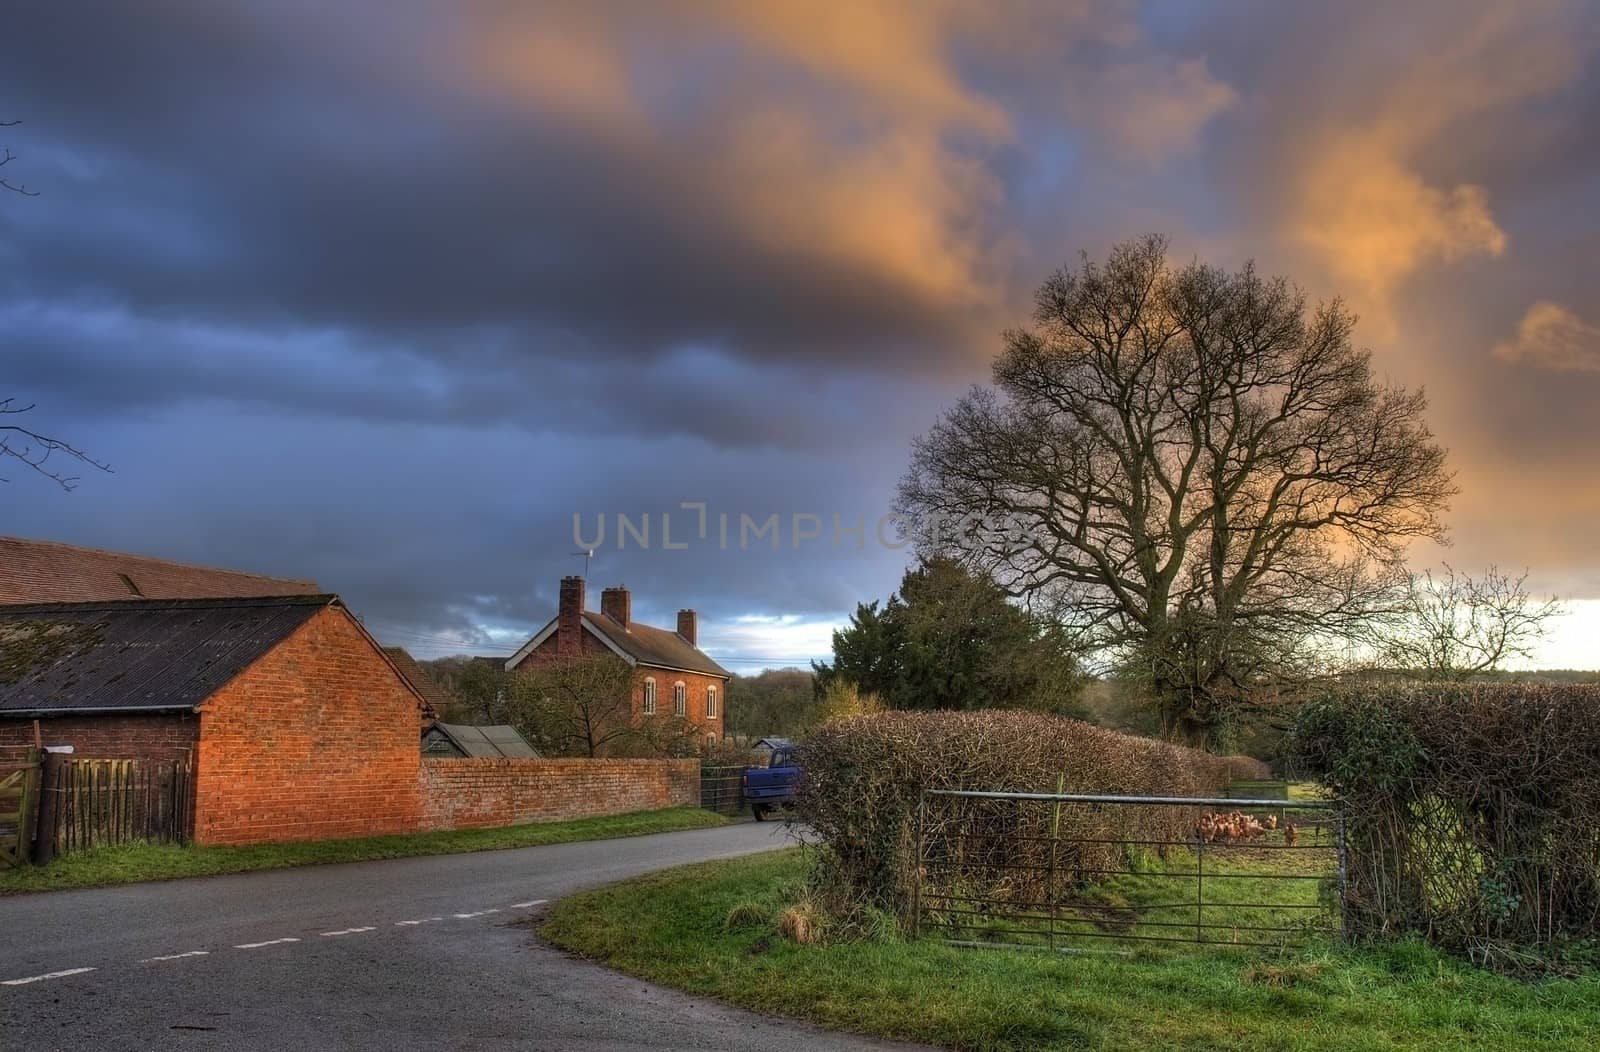 Worcestershire farm at sunset by andrewroland